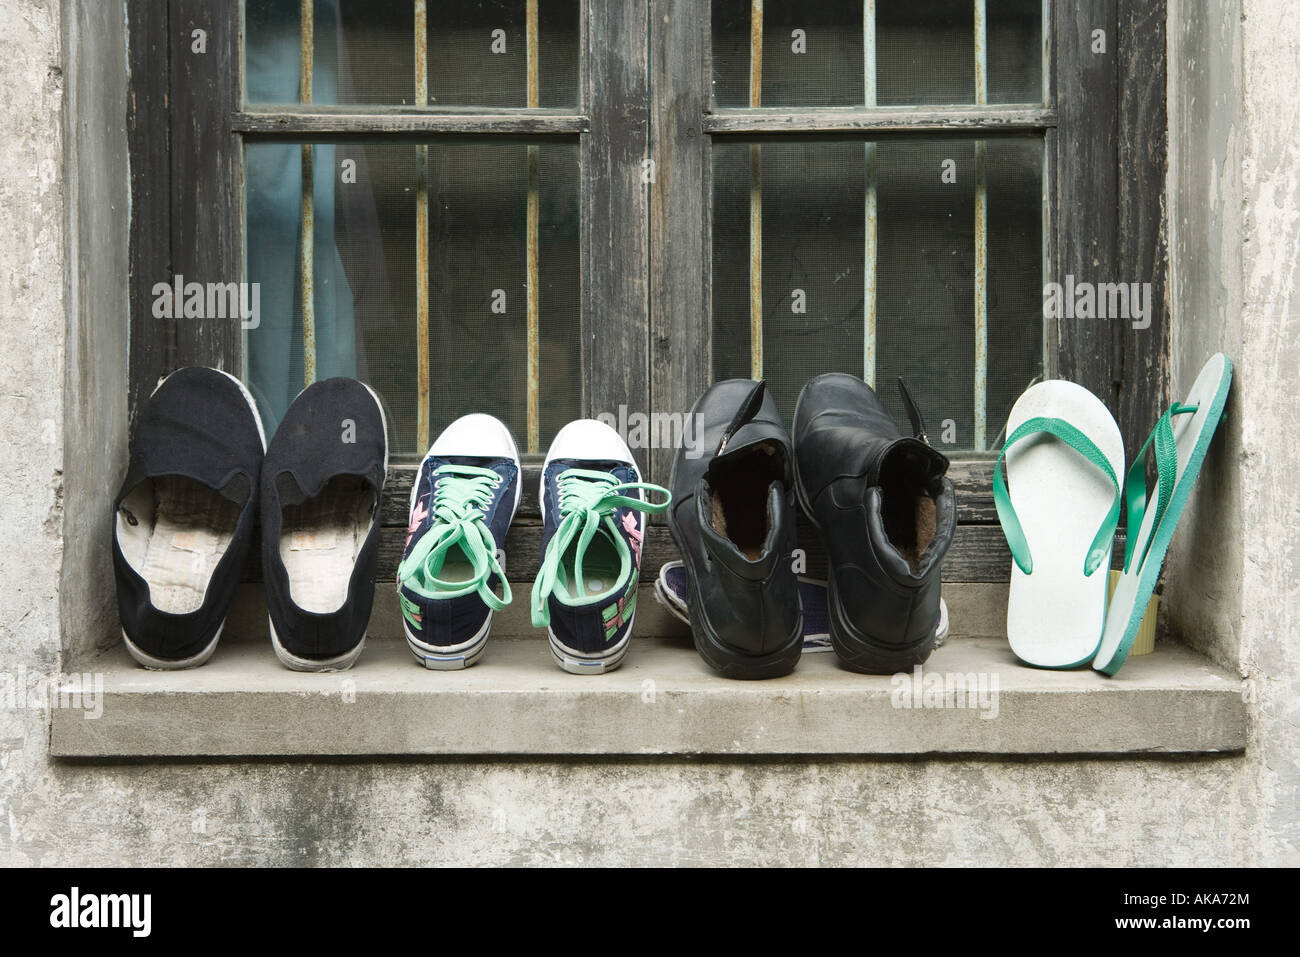 Shoes lined up on windowsill Stock Photo